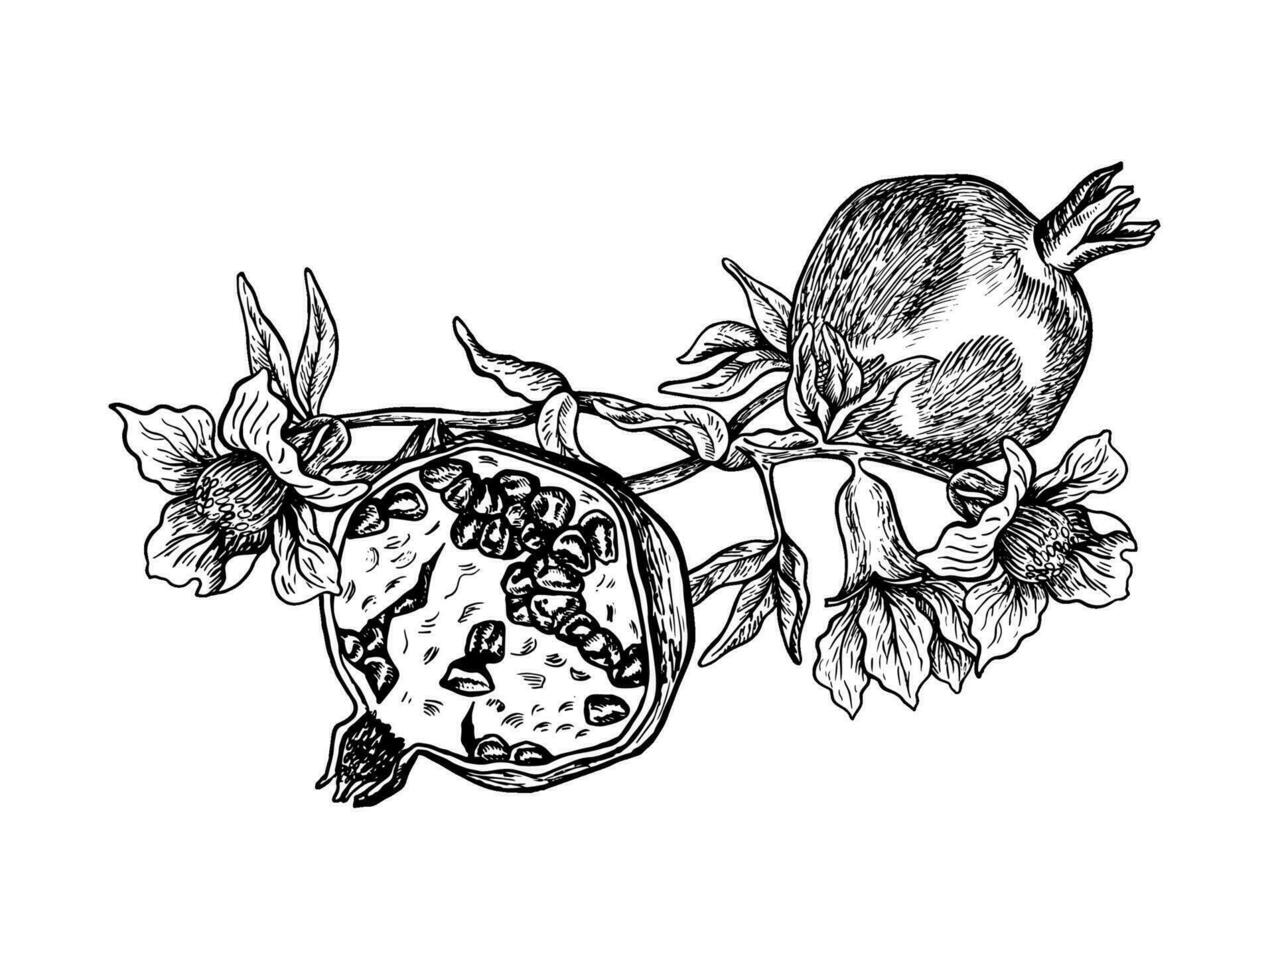 Half and whole pomegranate on a flowering branch, hand drawn black and white graphic vector illustration. Isolated on a white background. For packaging, banners and menus, textiles and posters.